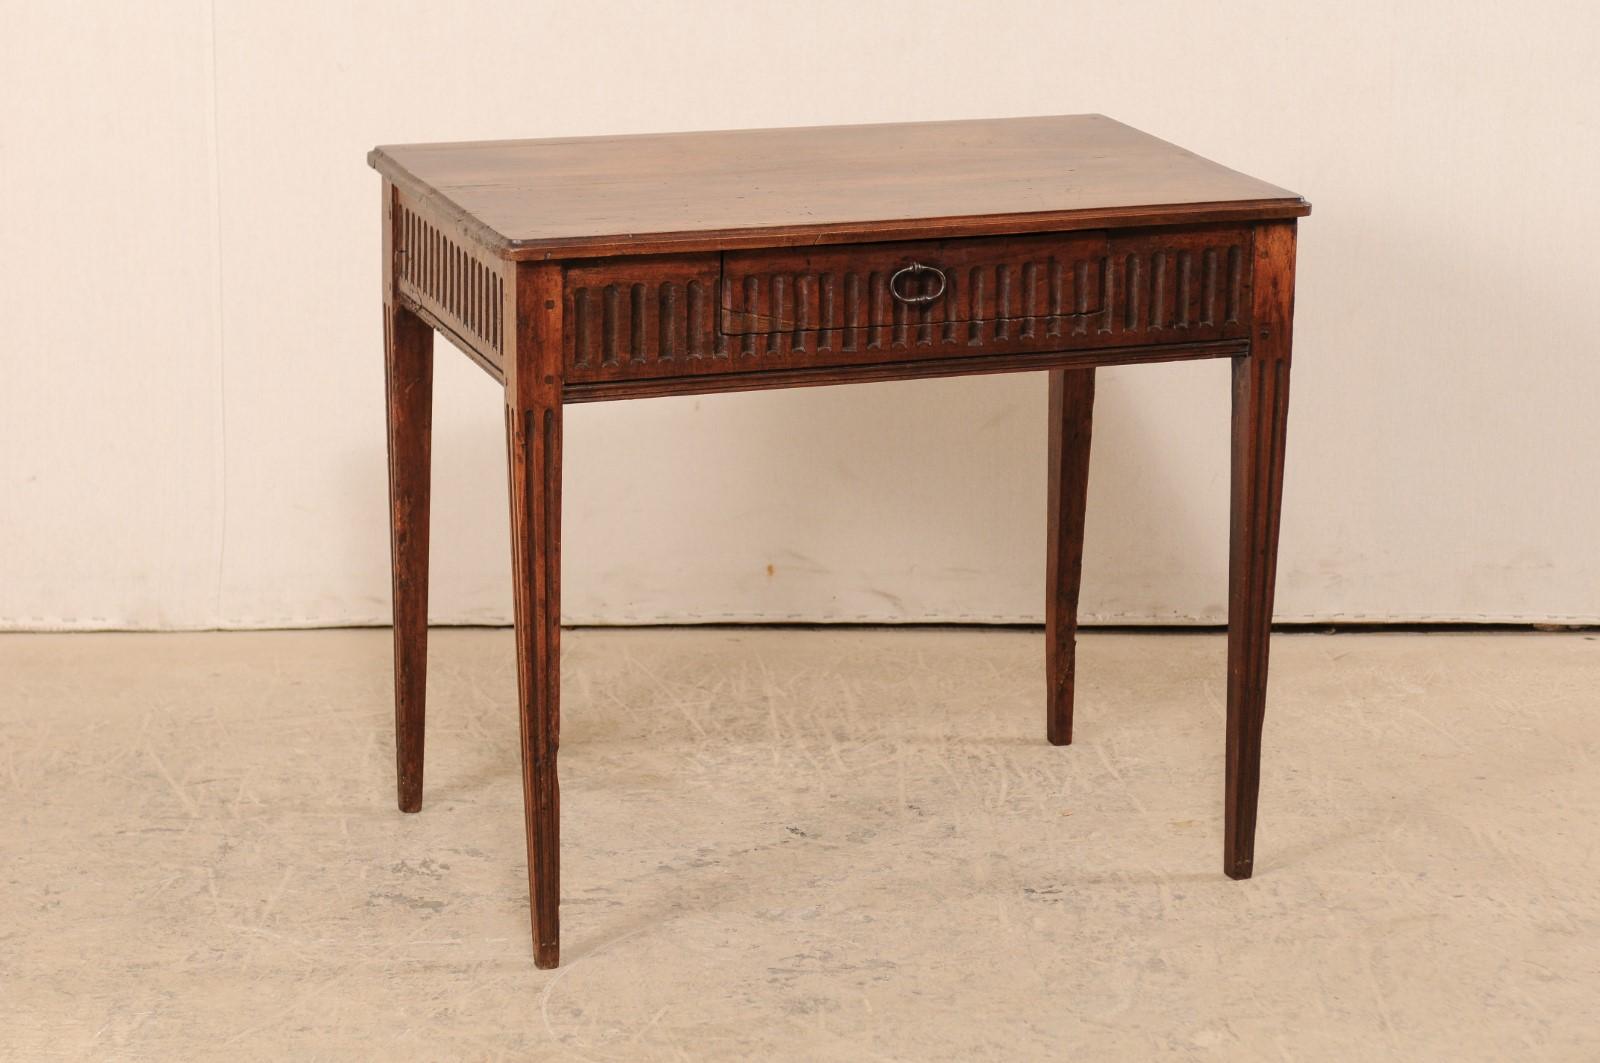 An Italian carved wood occasional table with single drawer from the 18th century. This antique table from Italy features beautifully carved fluted details about all sides of the apron, and down each of the four legs. The rectangular-shaped top has